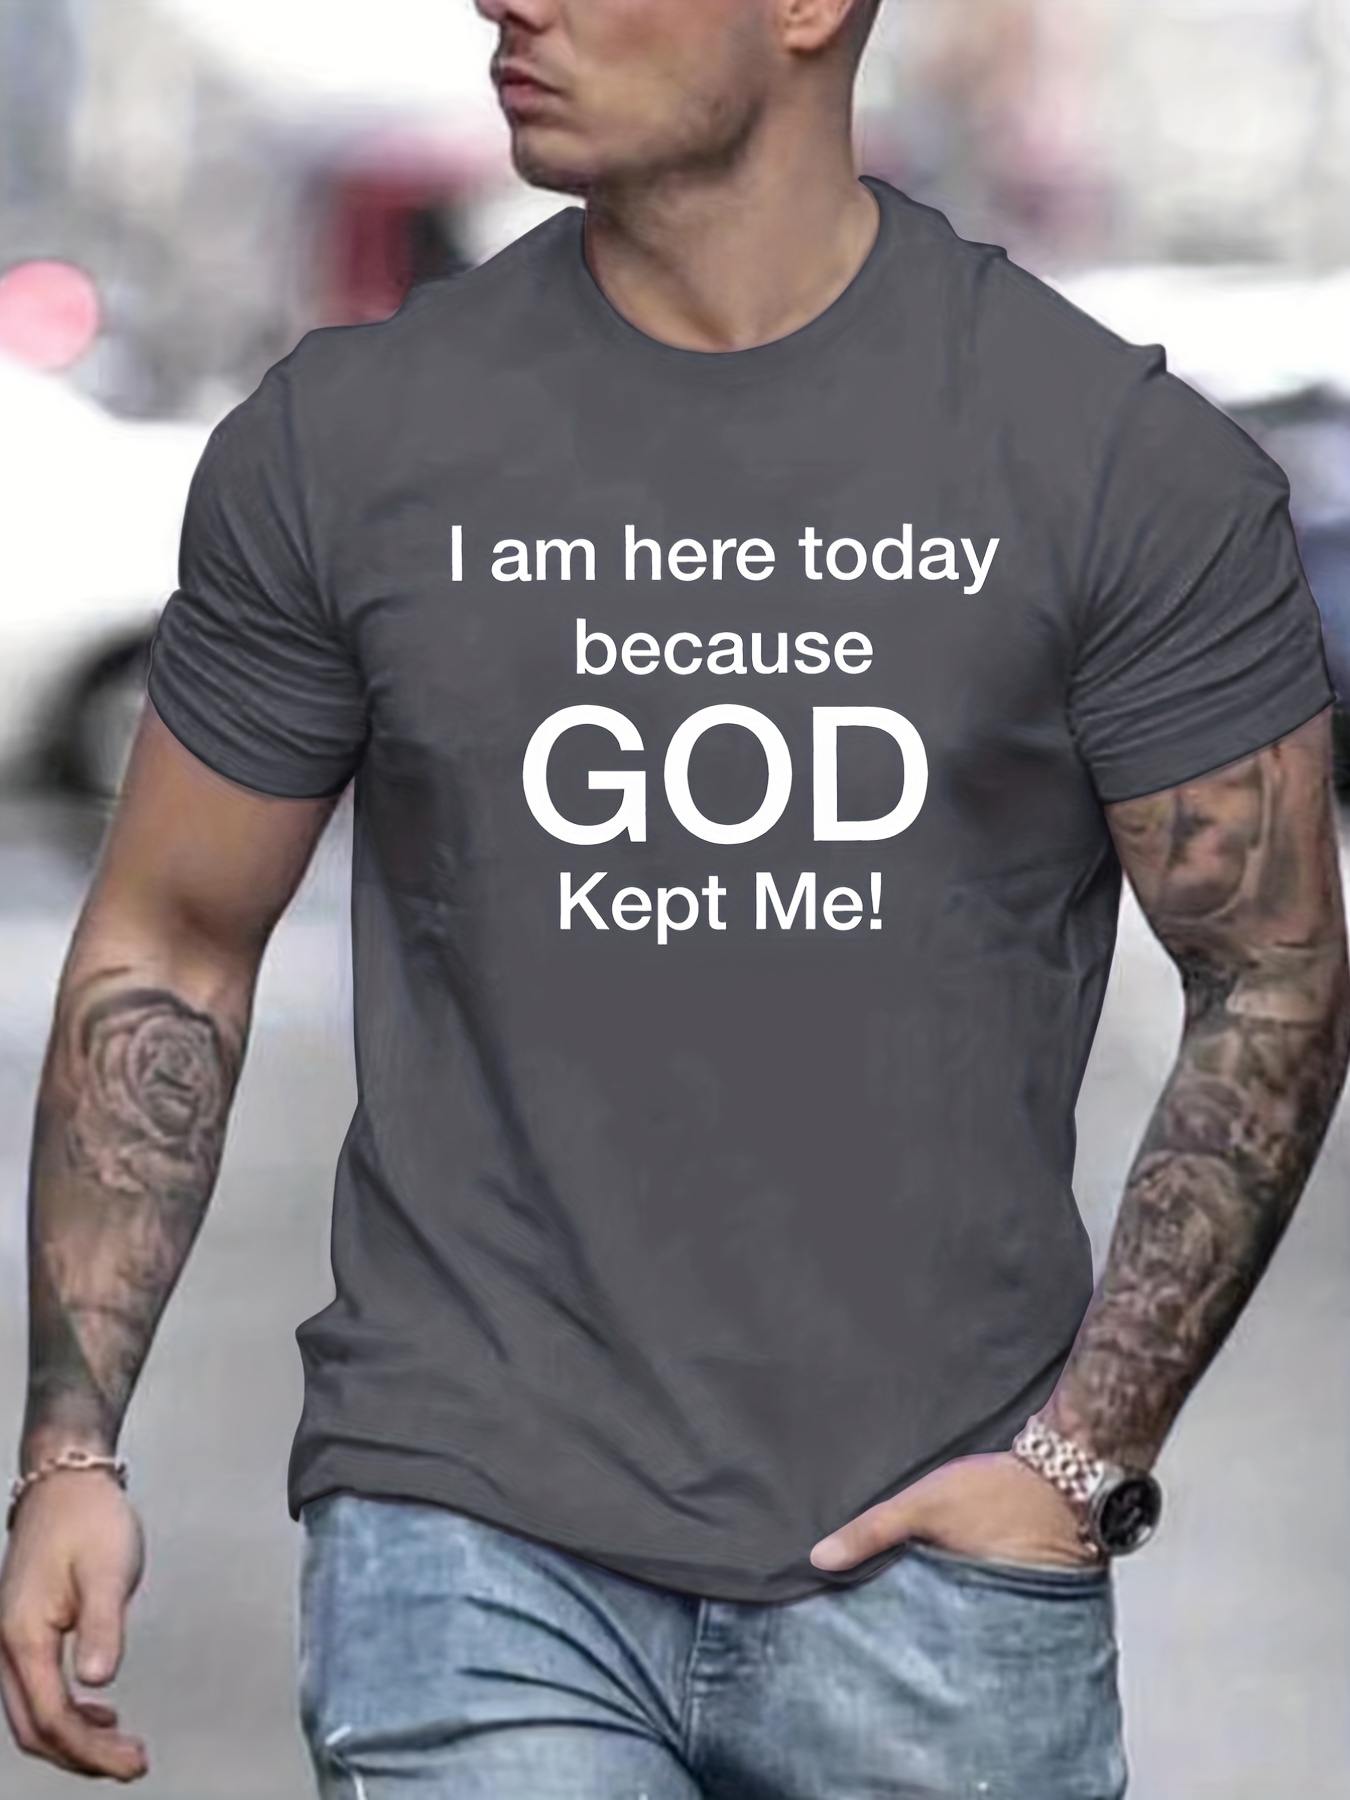 tees for men god kept me print t shirt casual short sleeve tshirt for summer spring fall tops as gifts details 12